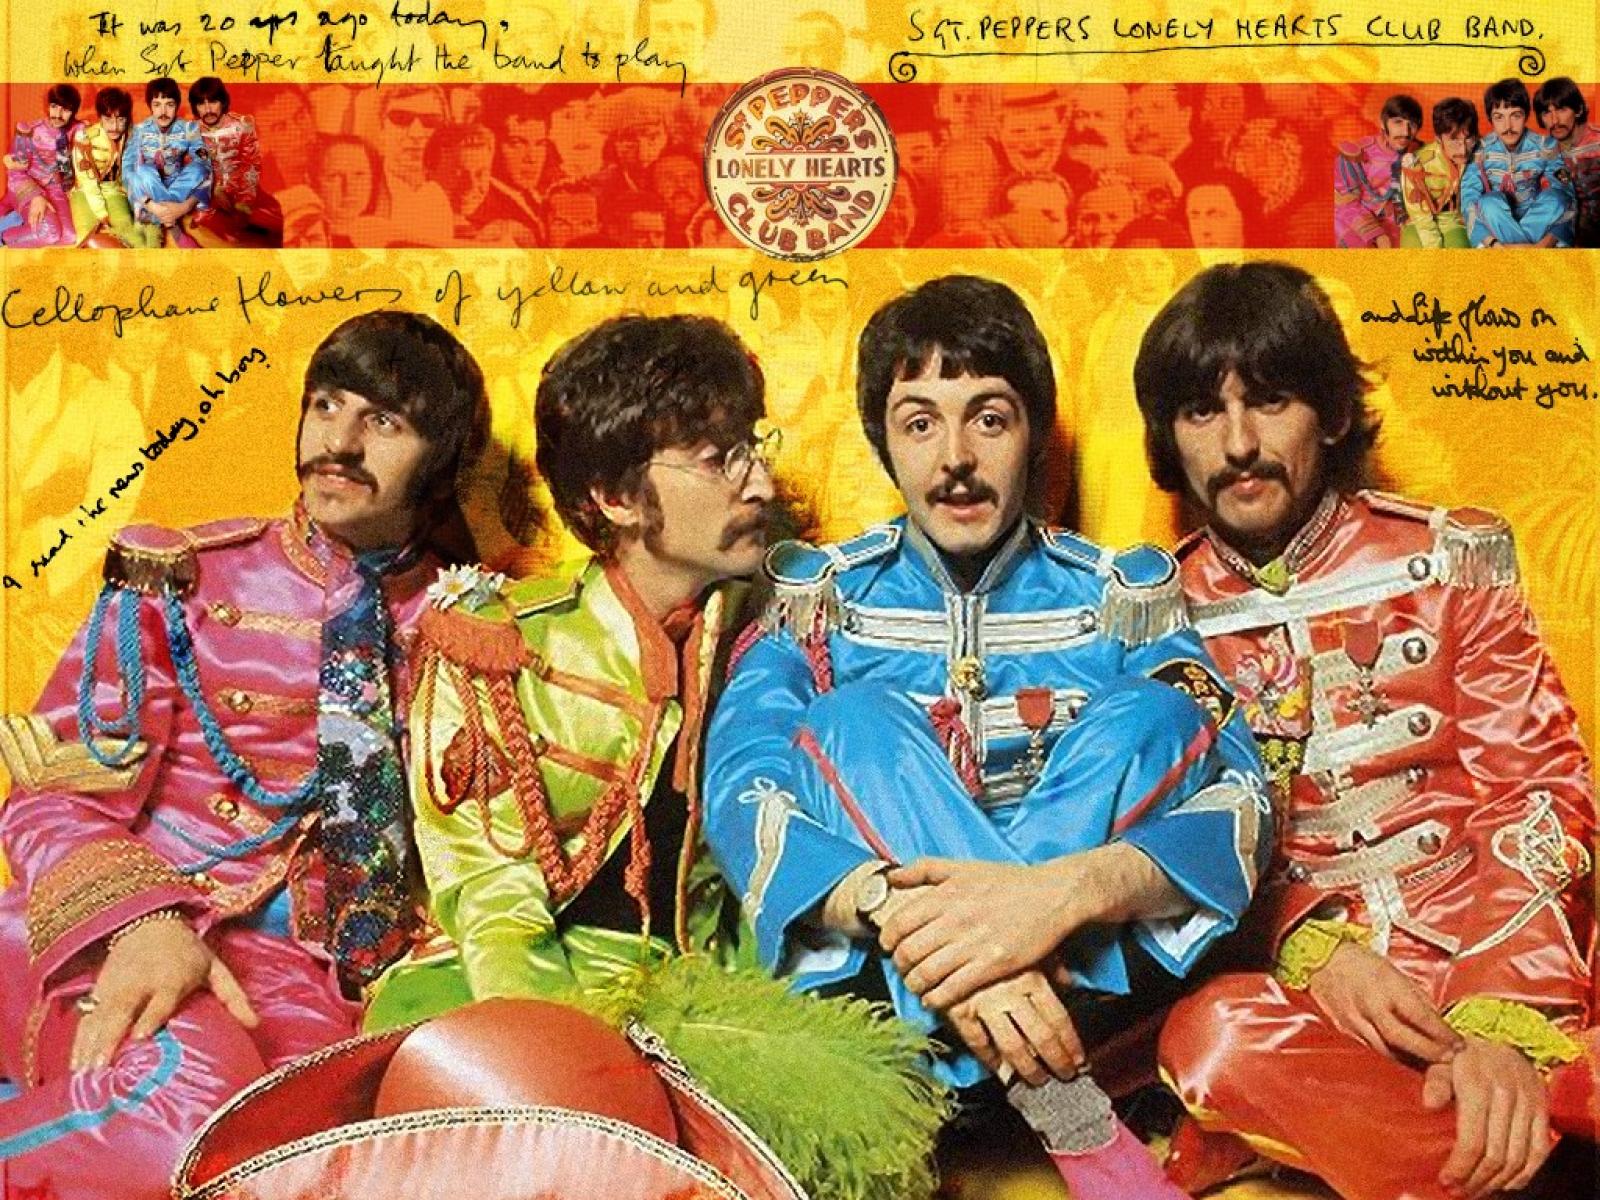 Desktop wallpaper with music theme featuring The Beatles.